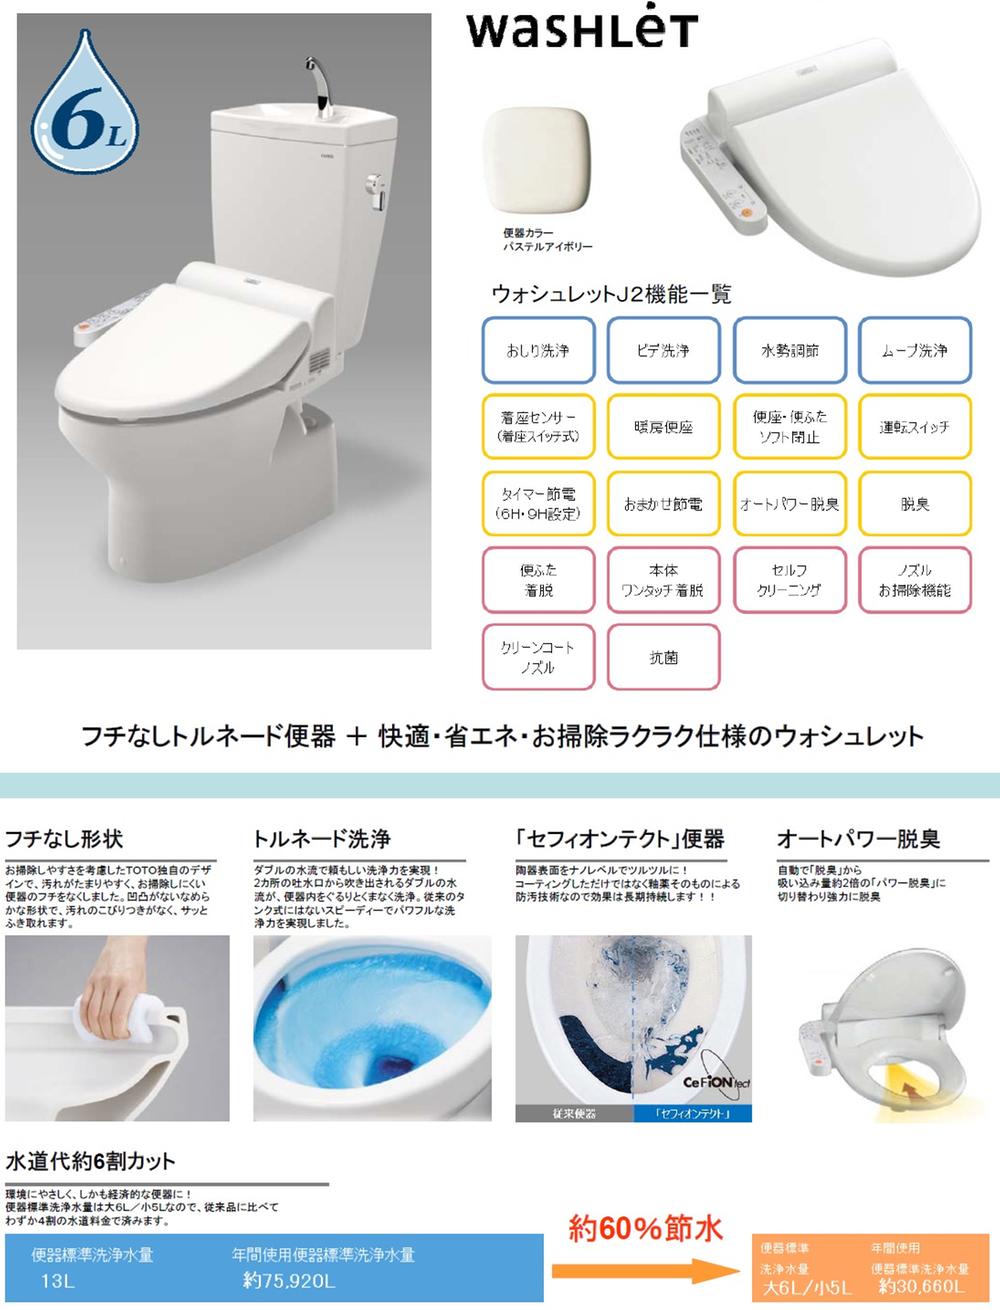 Other Equipment. Hot water is Washlet